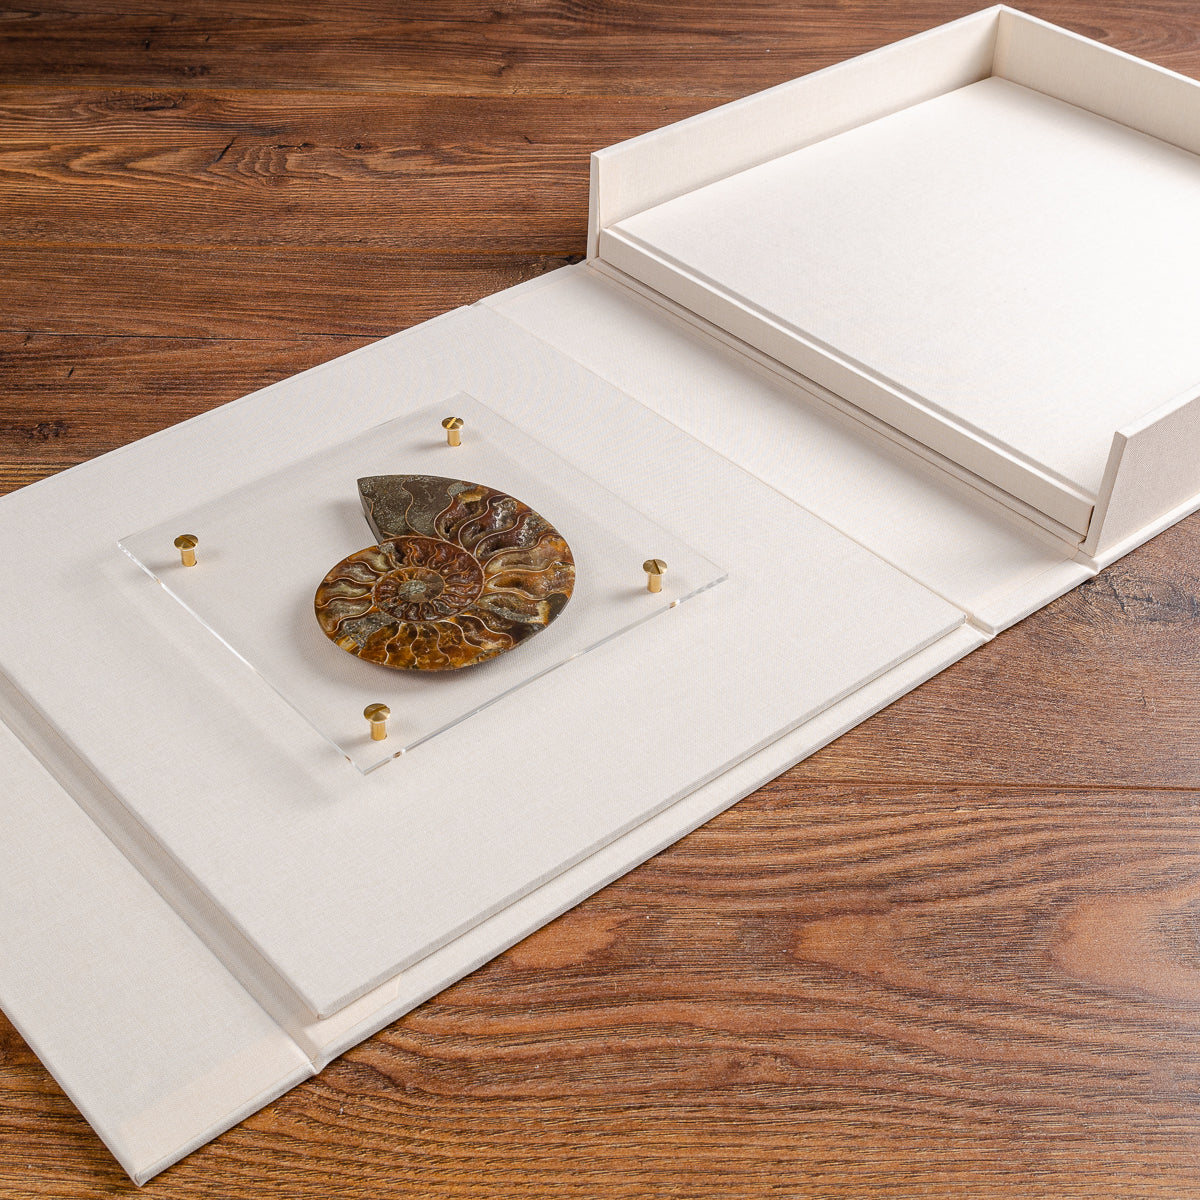 luxury high quality presentation box with ammonite fixed to inner cover and presentation brochure book in tray